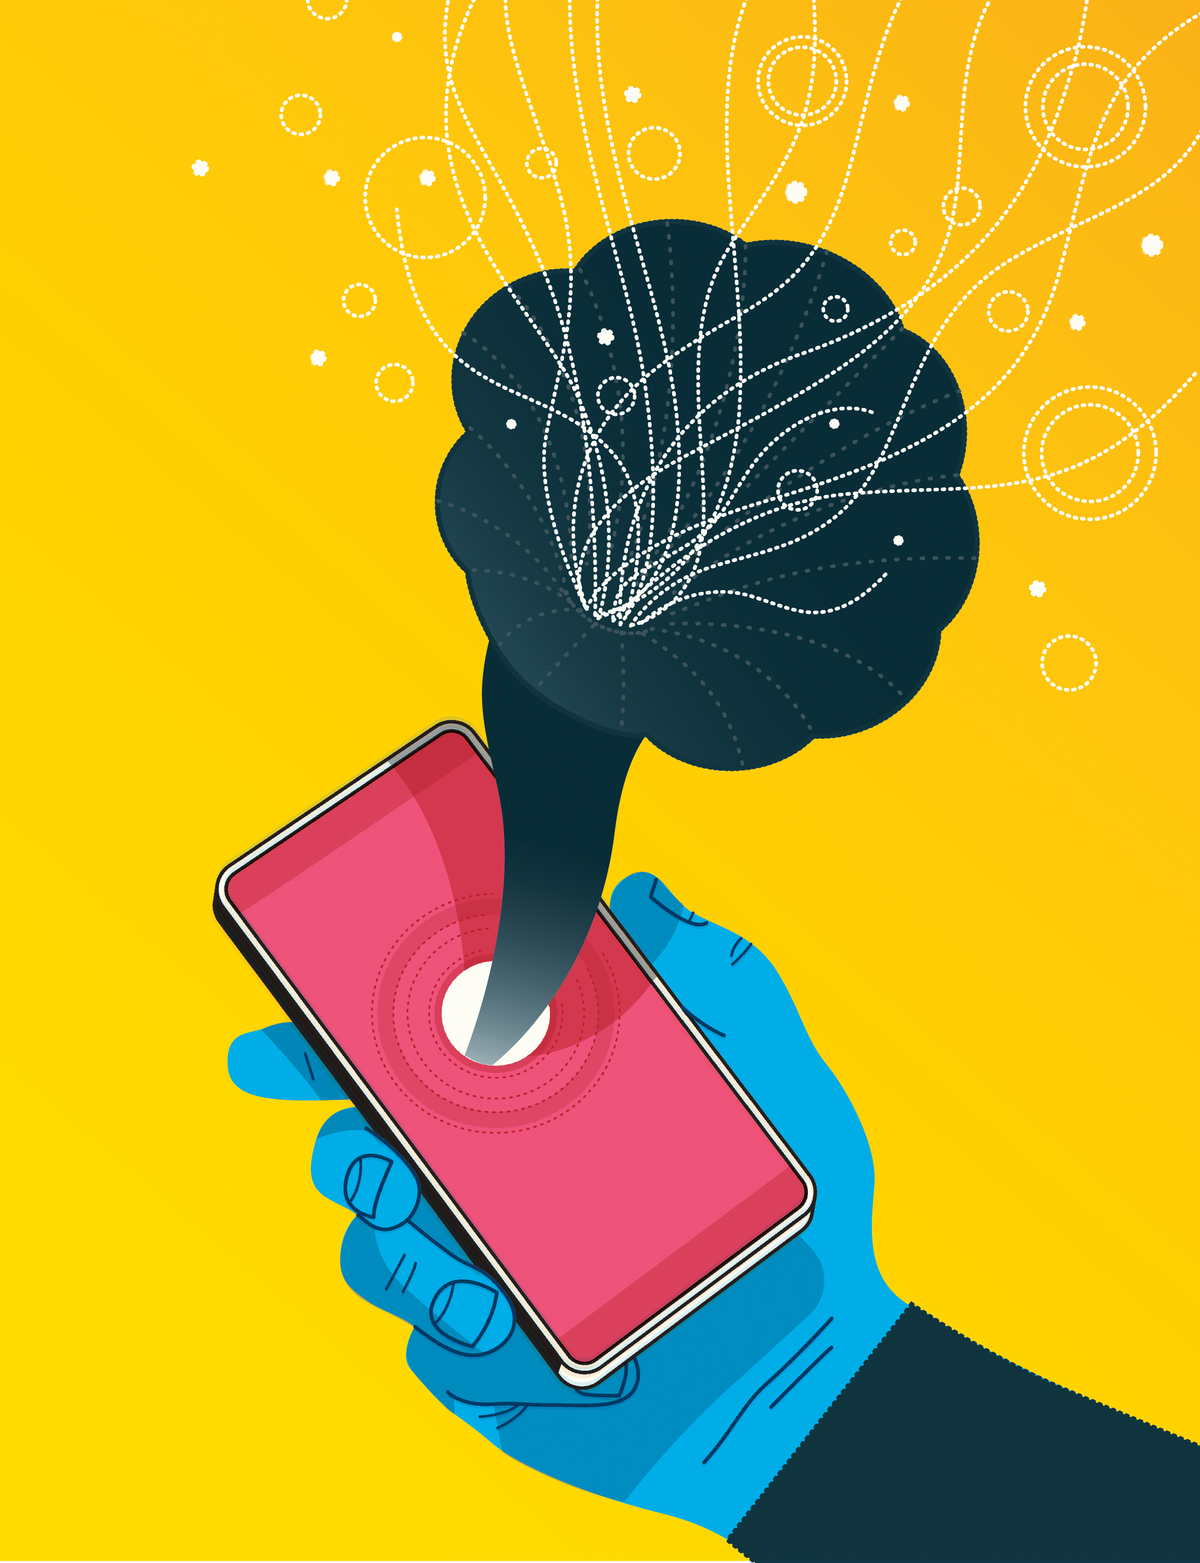 An illustration of a hand holding a smart phone with a old style speaker coming out of the screen.  